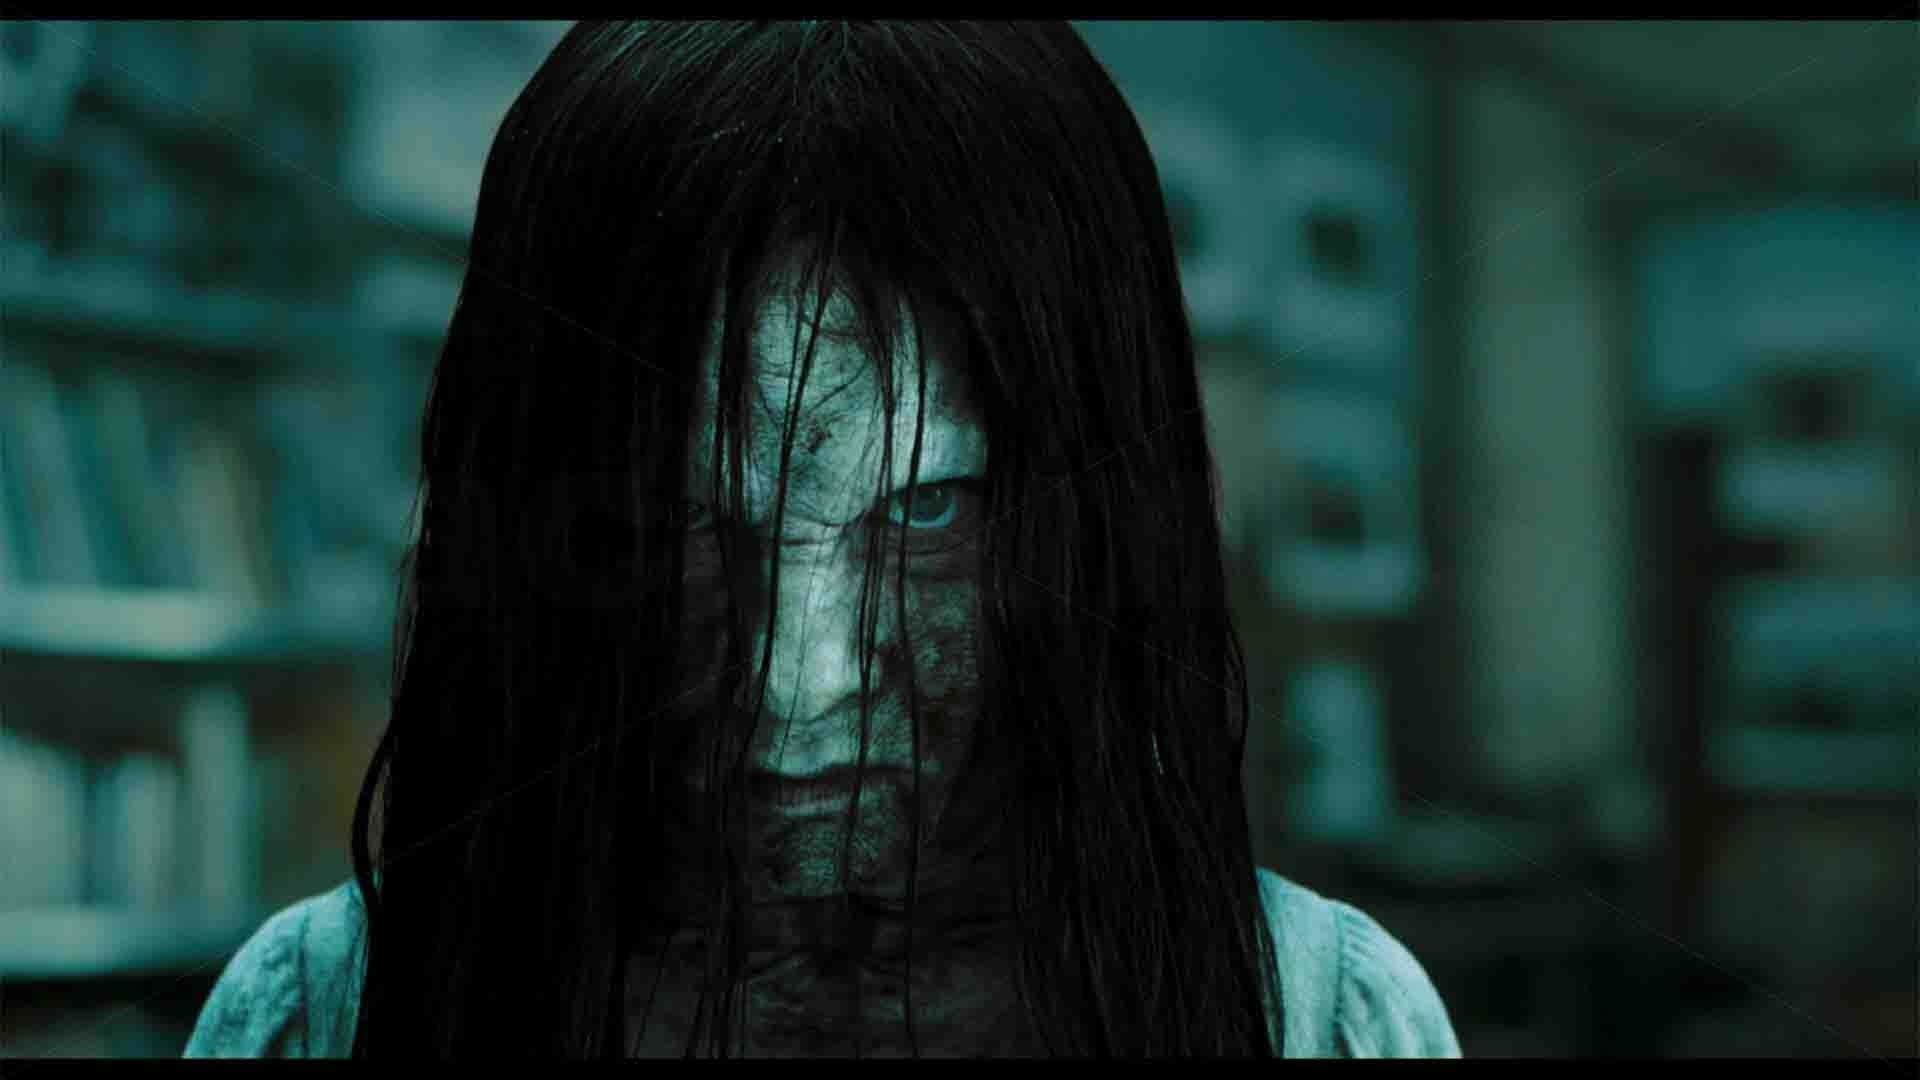 1920x1080 Scary Hd Wallpapers Horror Wallpapers For Desktop Scary Wallpapers 